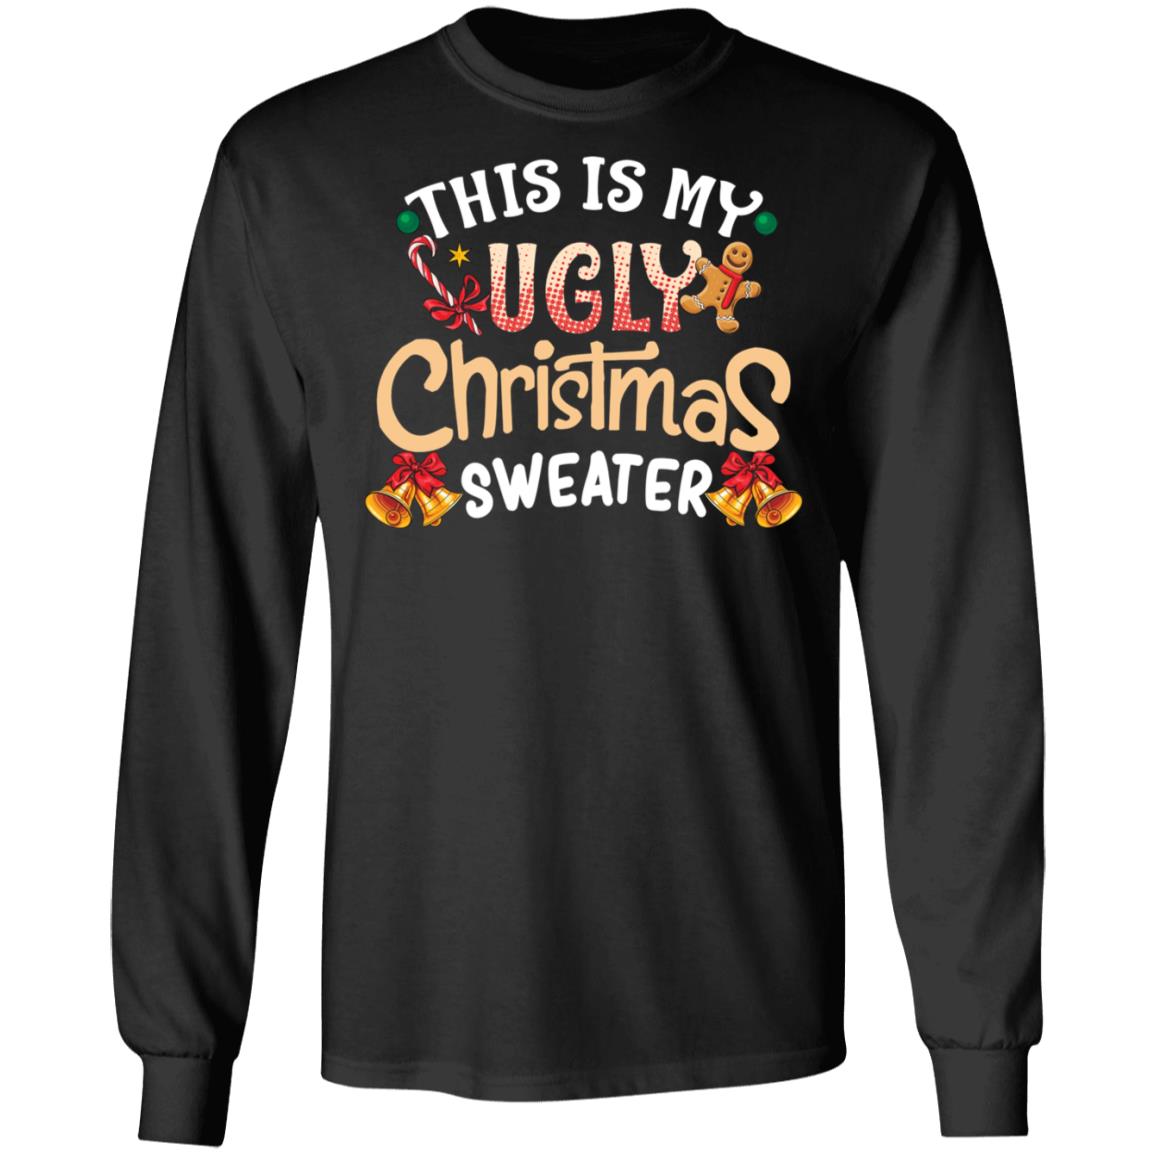 This is my ugly christmas sweater, shirt